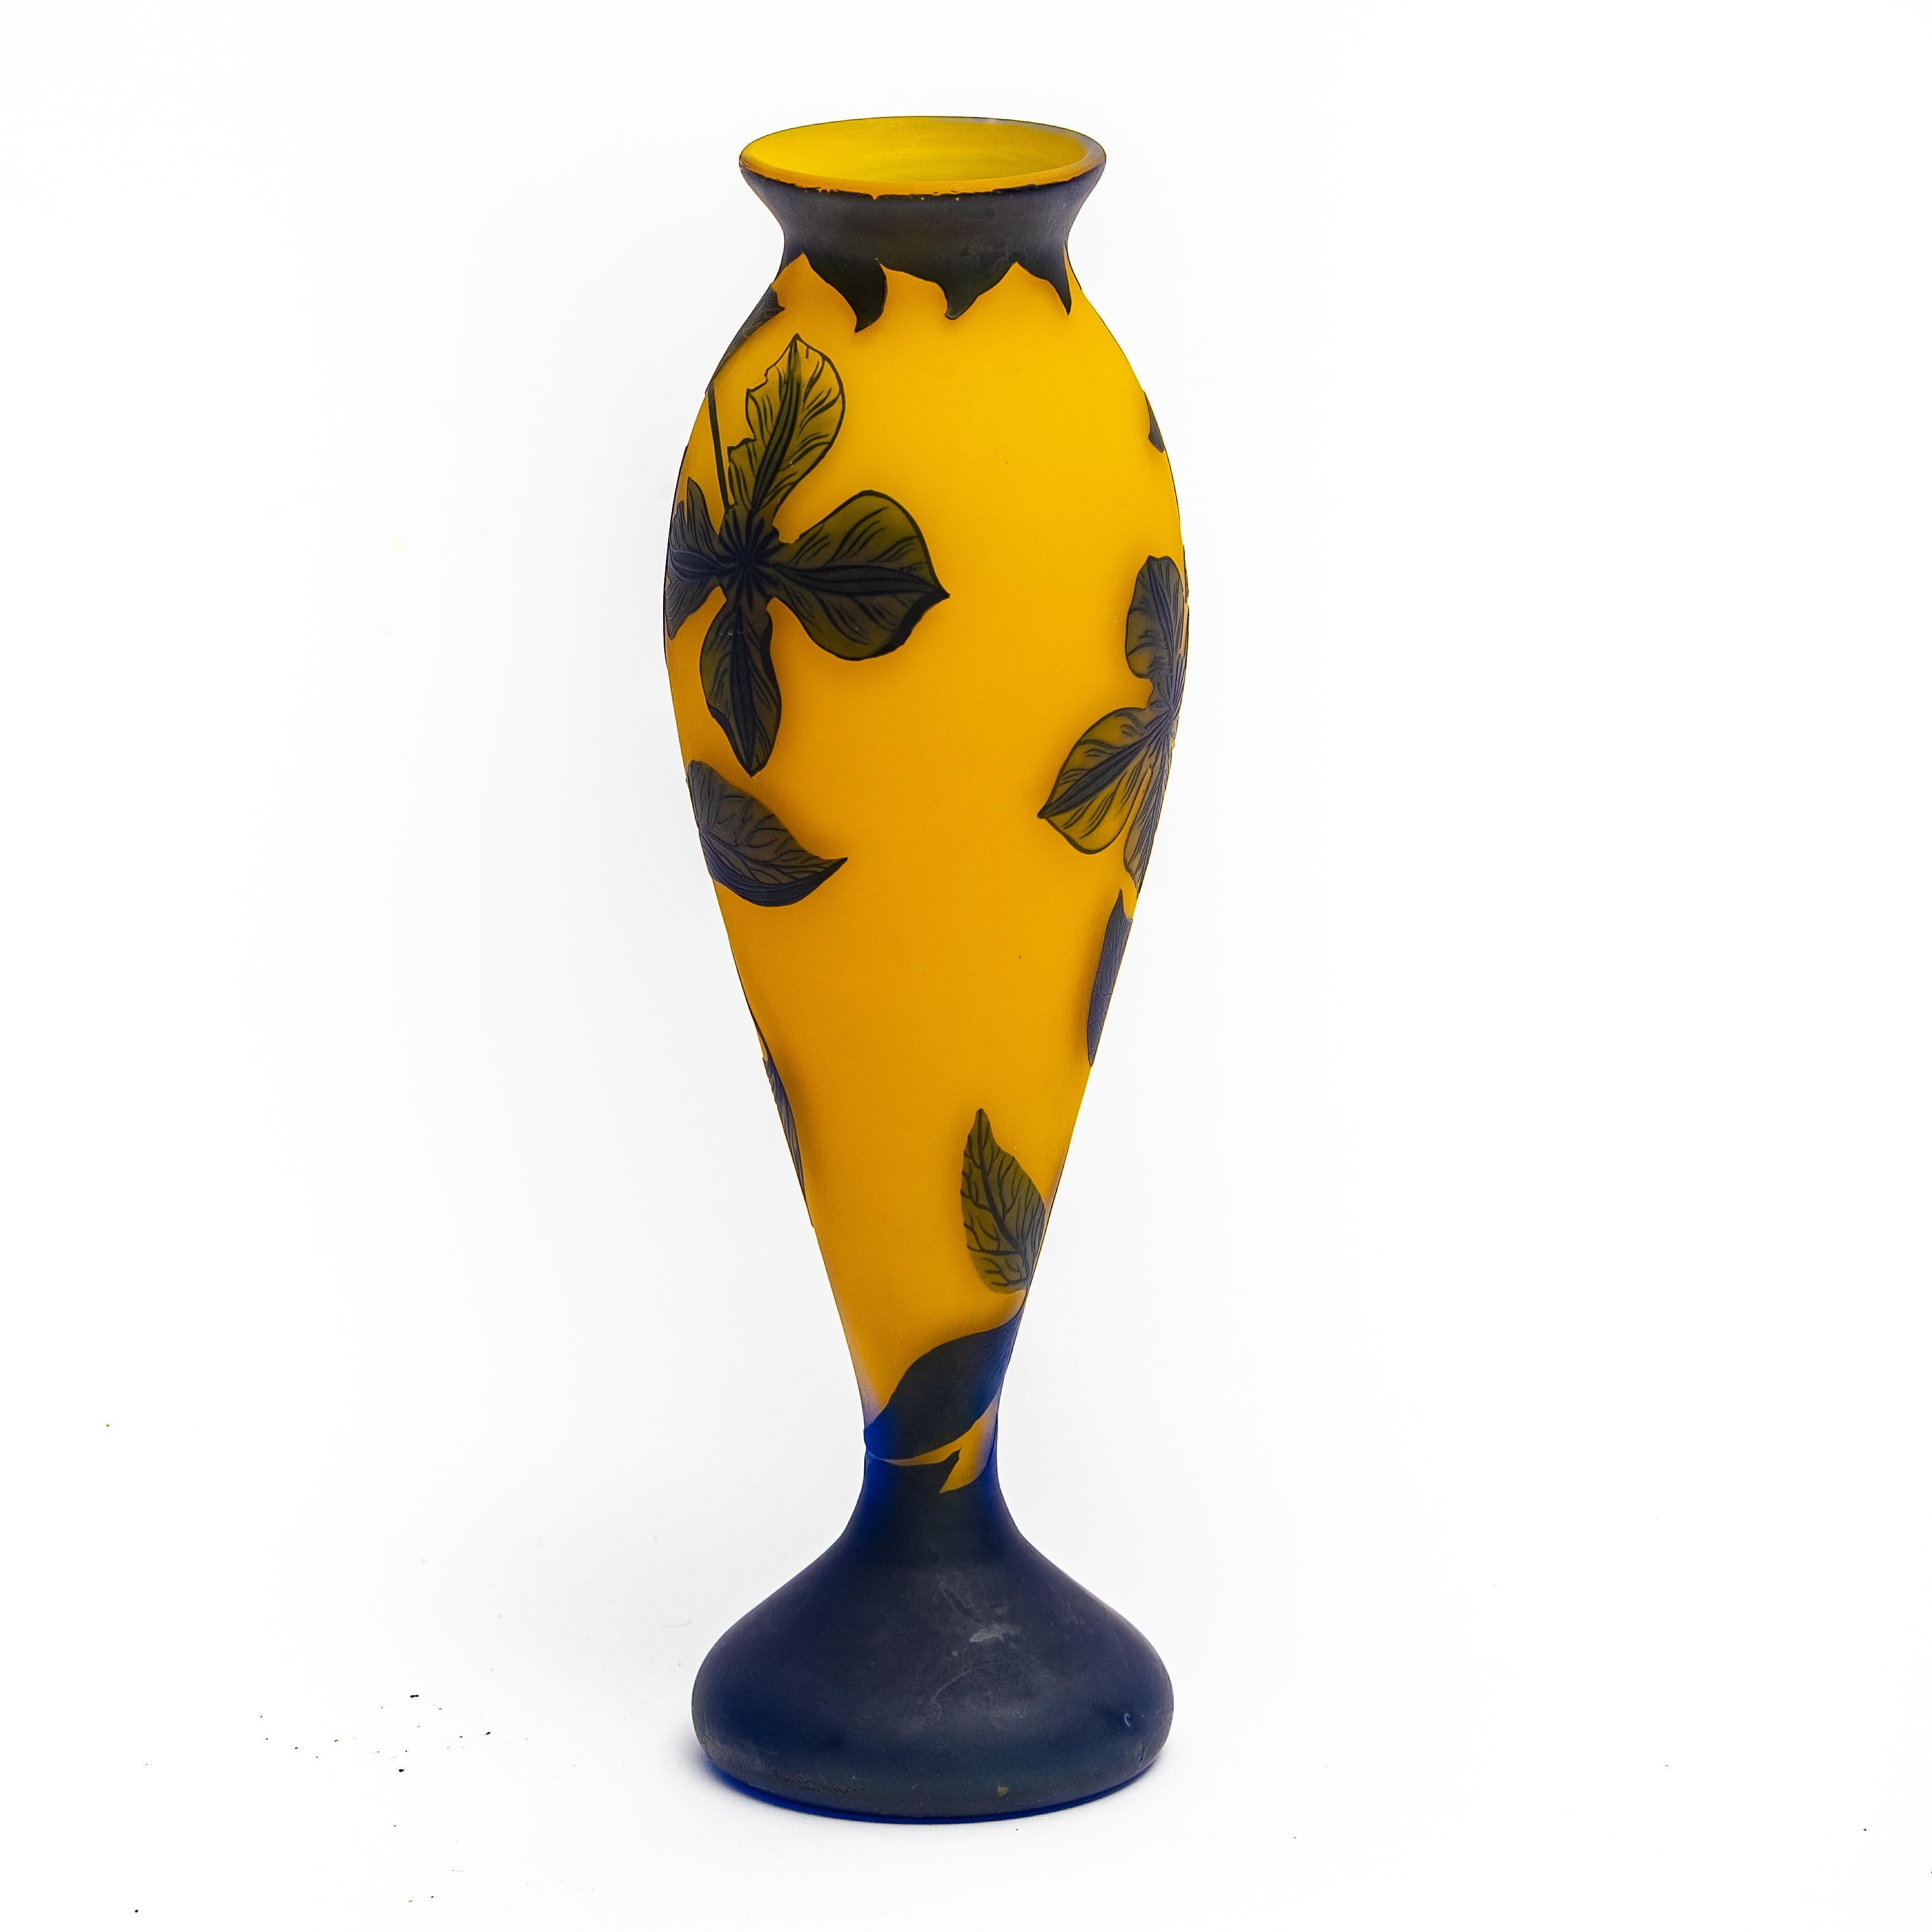 Loetz Signed Richard cameo glass vase, early 20th century, with floral decoration in navy blue on yellow ground, signed 